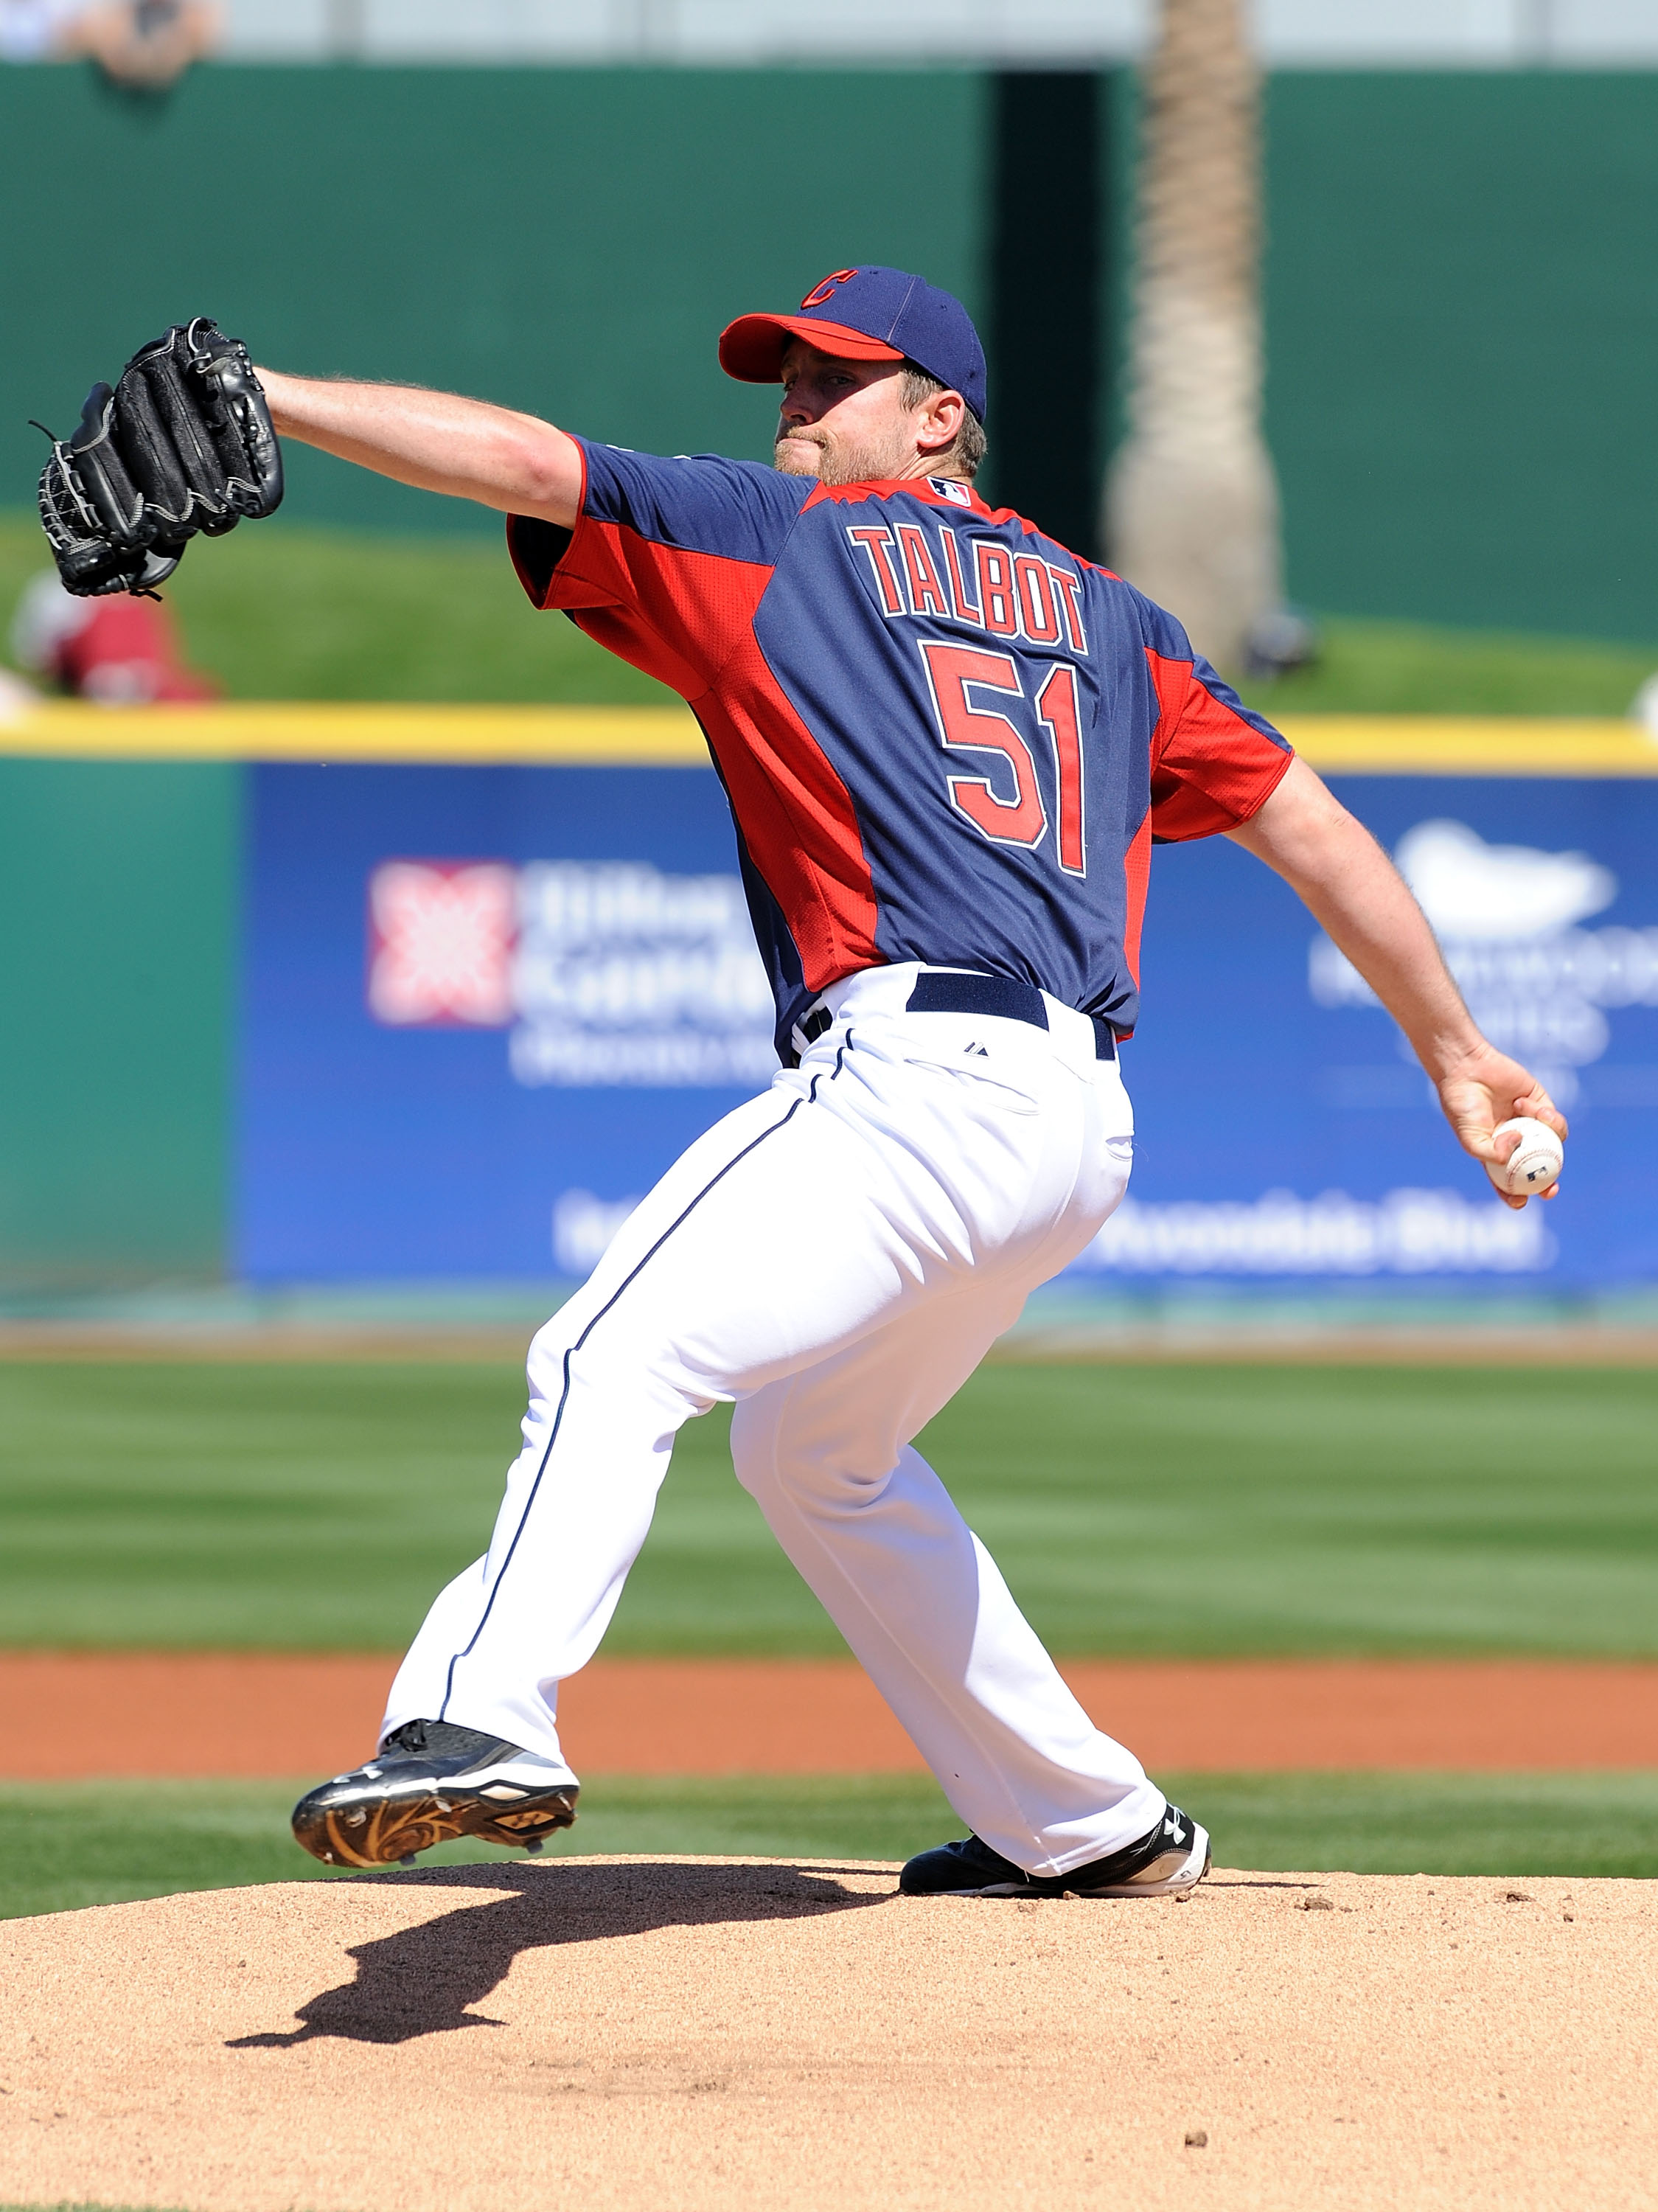 GOODYEAR, AZ - MARCH 11:  Mitch Talbot #51 of the Cleveland Indians delivers a pitch against the Seattle Mariners at Goodyear Ballpark on March 11, 2011 in Goodyear, Arizona.  (Photo by Norm Hall/Getty Images)